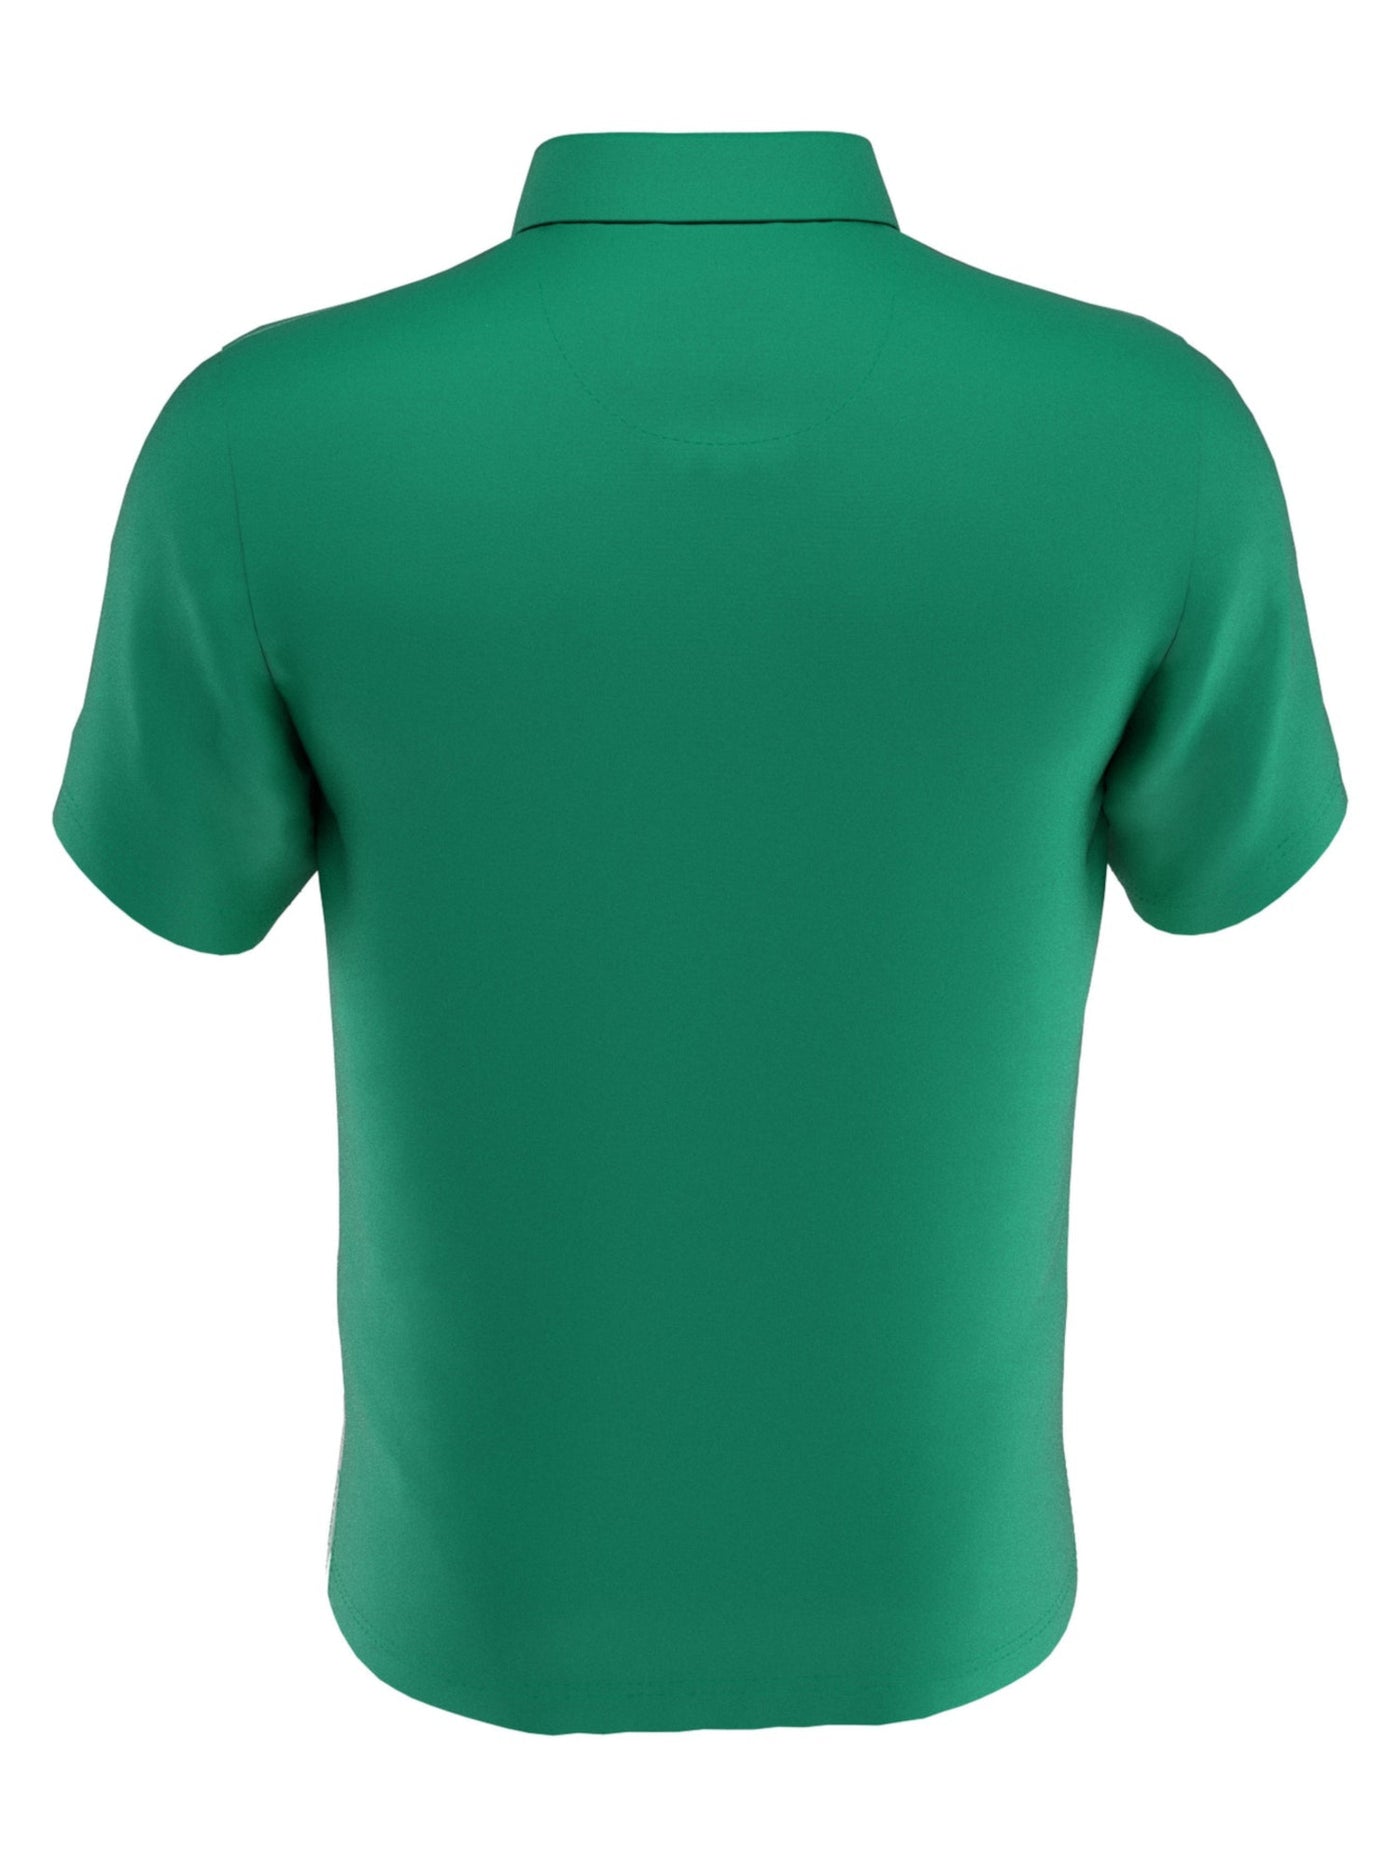 HYBRID APPAREL Mens Green Ombre Short Sleeve Moisture Wicking Polo S